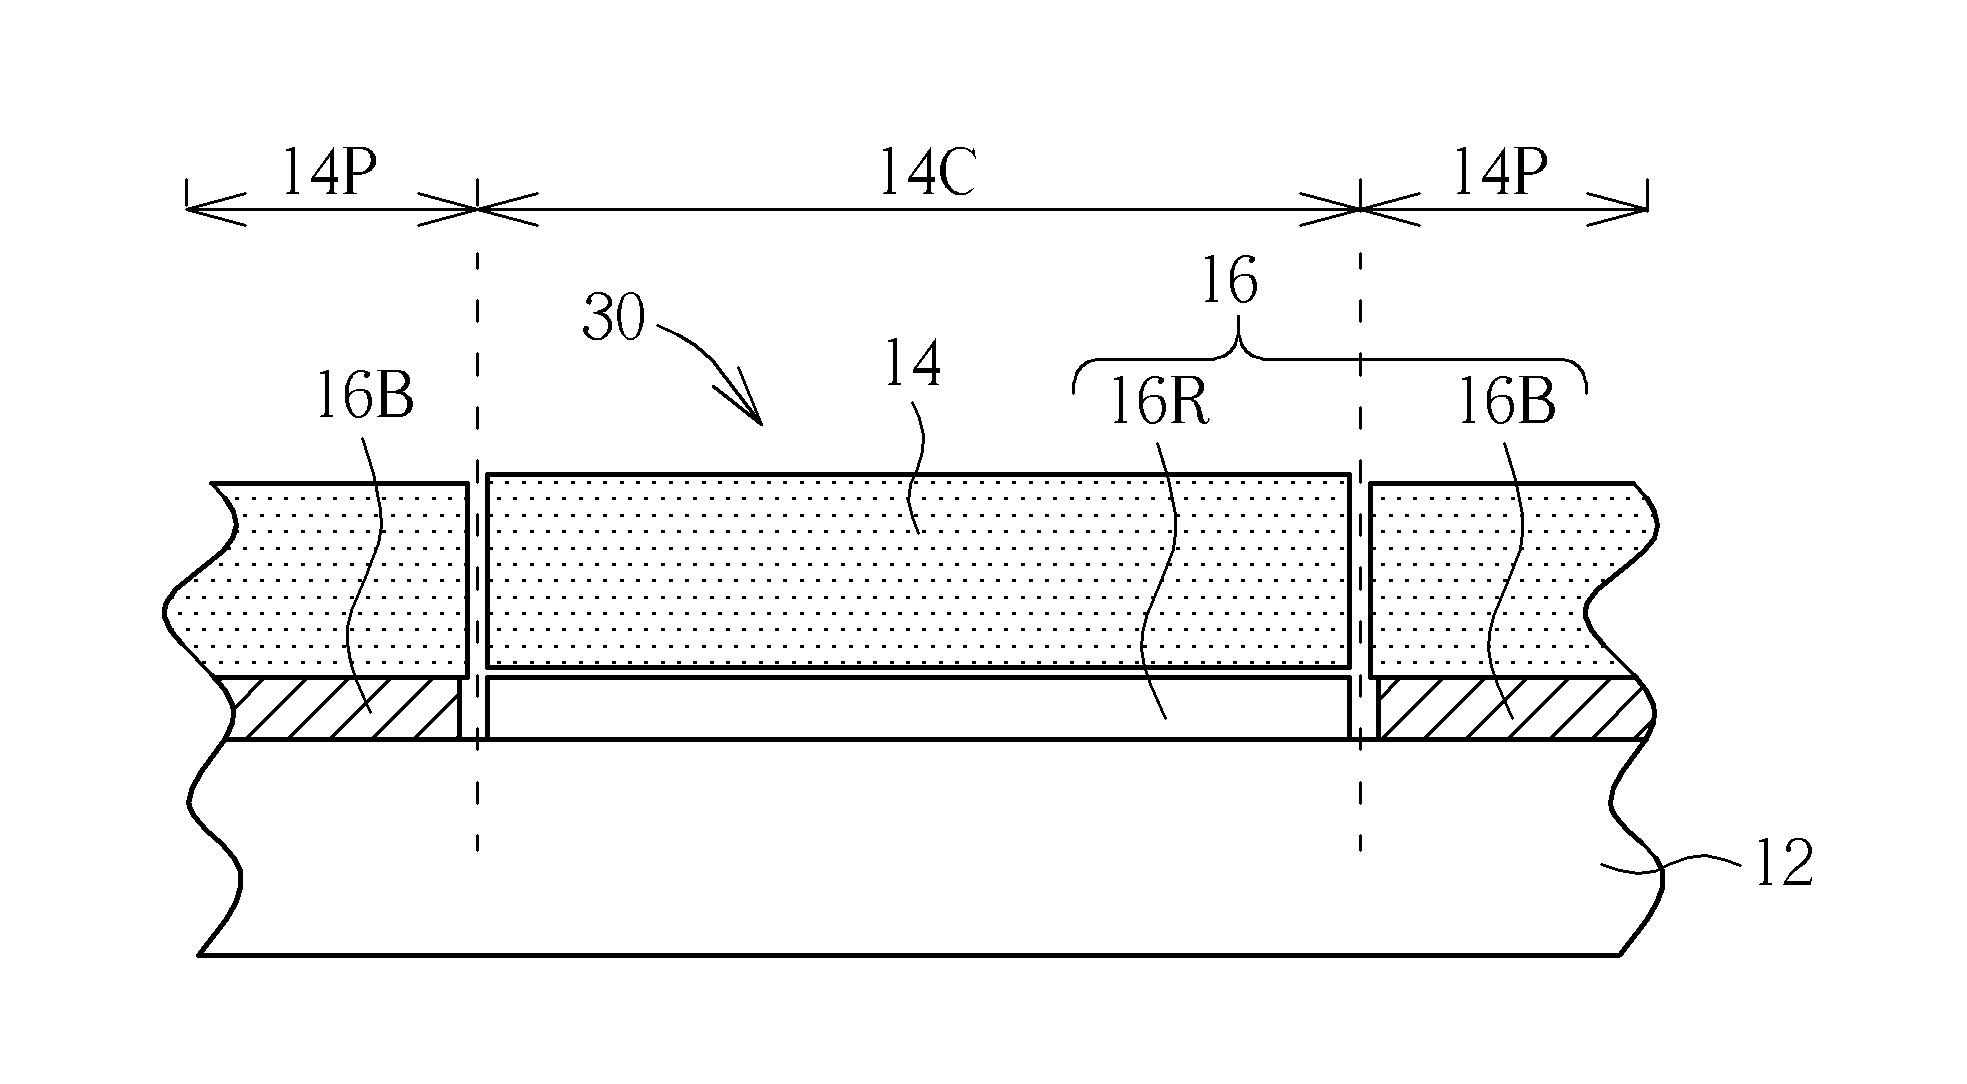 Flexible substrate structure and method of fabricating the same